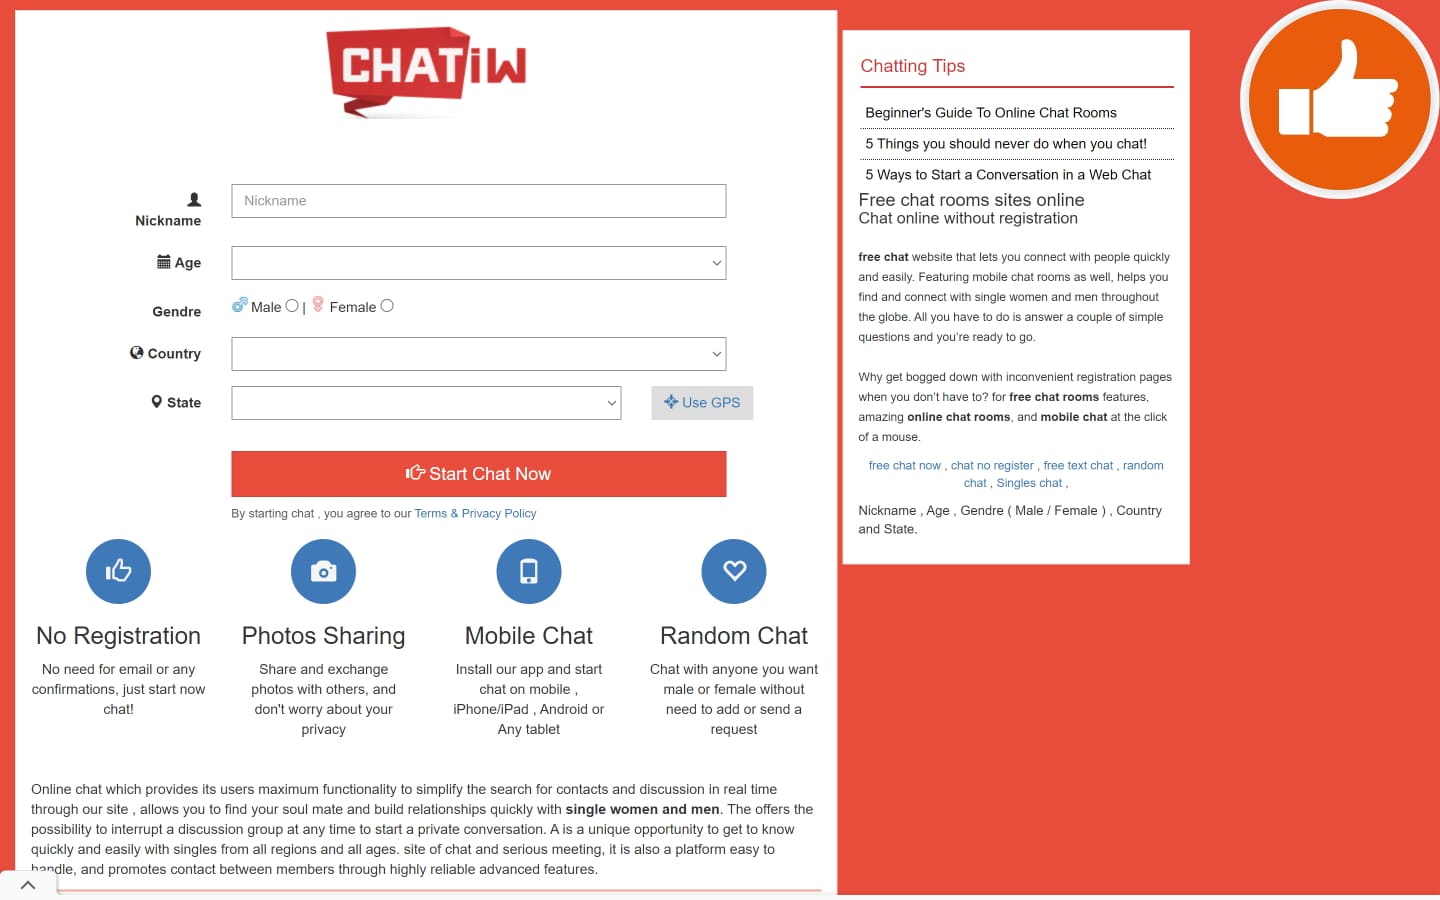 Review ChatIW.uk scam experience